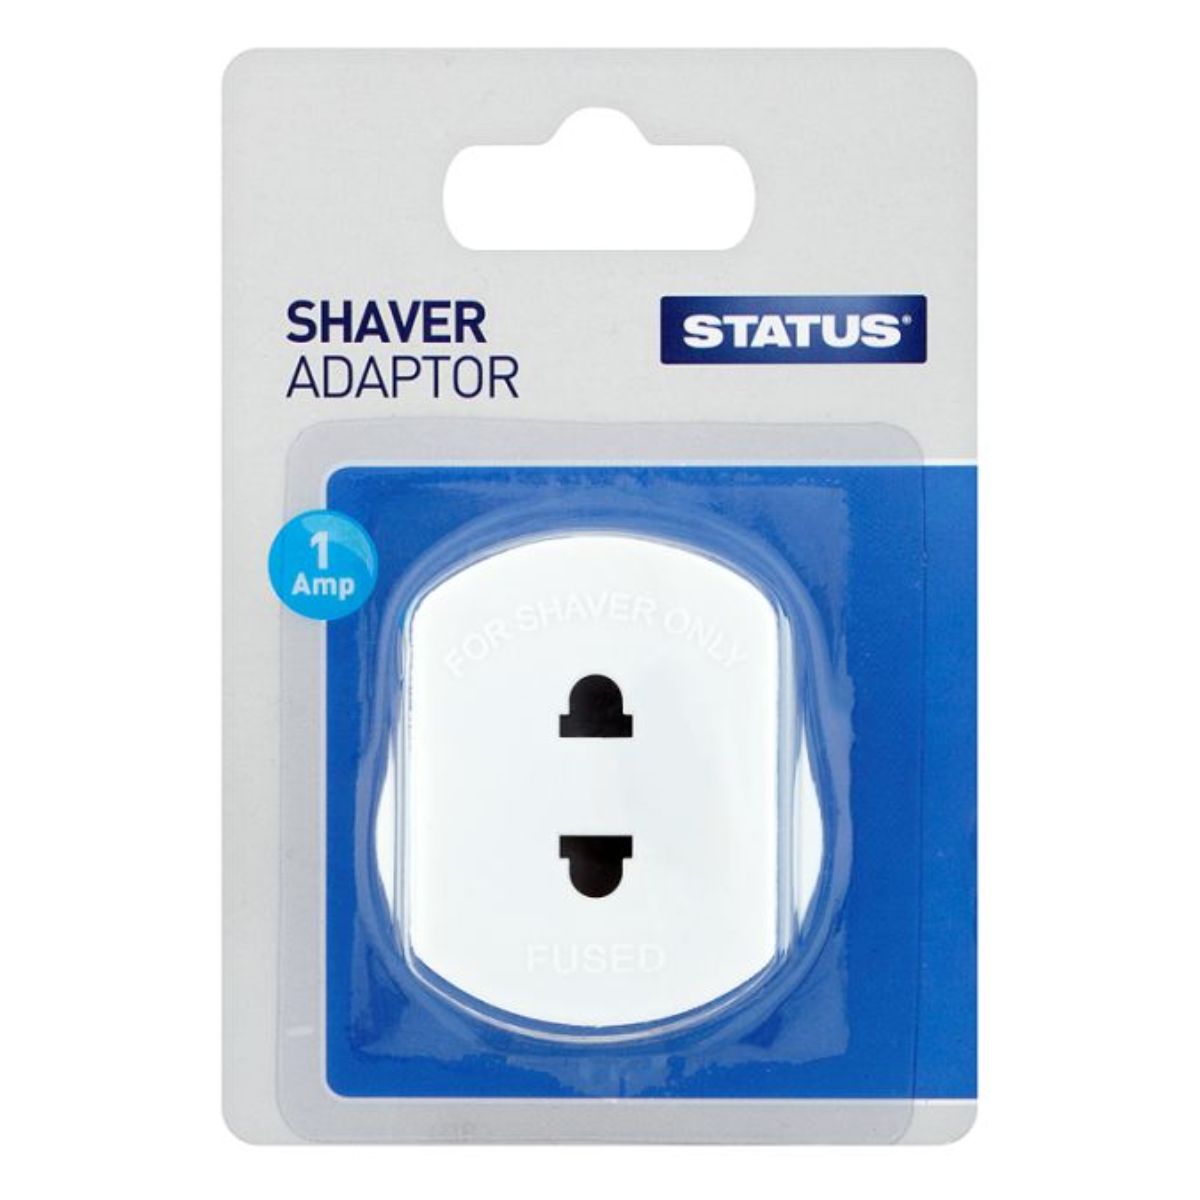 Status - Shaver Adaptor 1amp - 1pcs shaver adapter in white packaging.